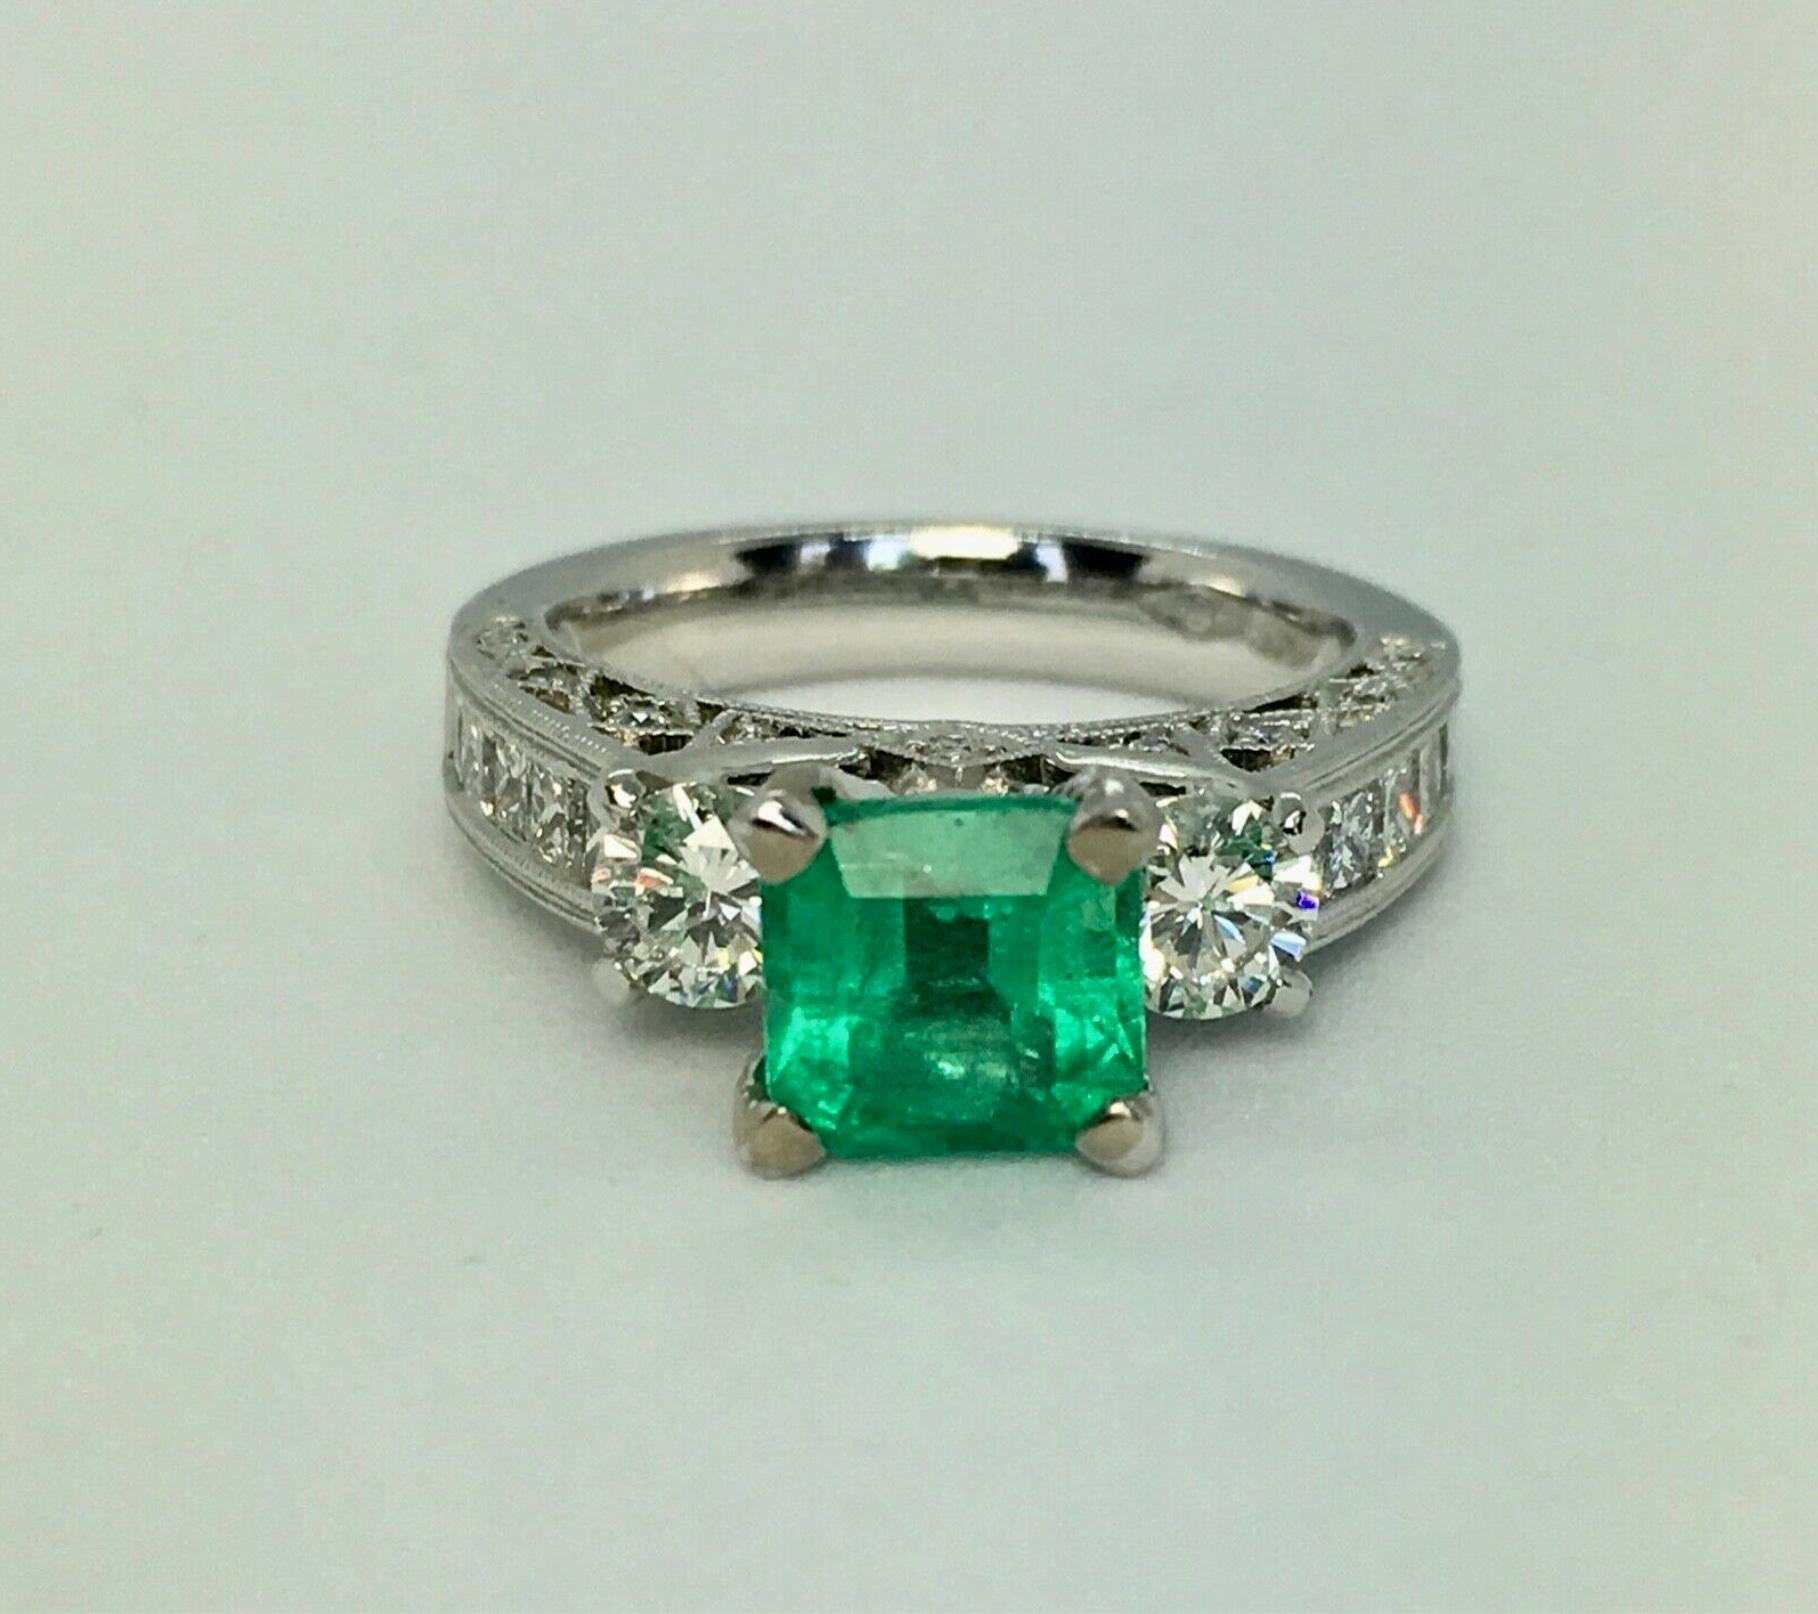 Fine Estate Natural Colombian Emerald Diamond Engagement Ring
Centered with a stunning natural Colombian Emerald 1.10 carat Vivid Medium Green, excellent brilliance and saturation.
Side natural Diamonds totaling 1.80 Carats, Clarity  VS1/ Color